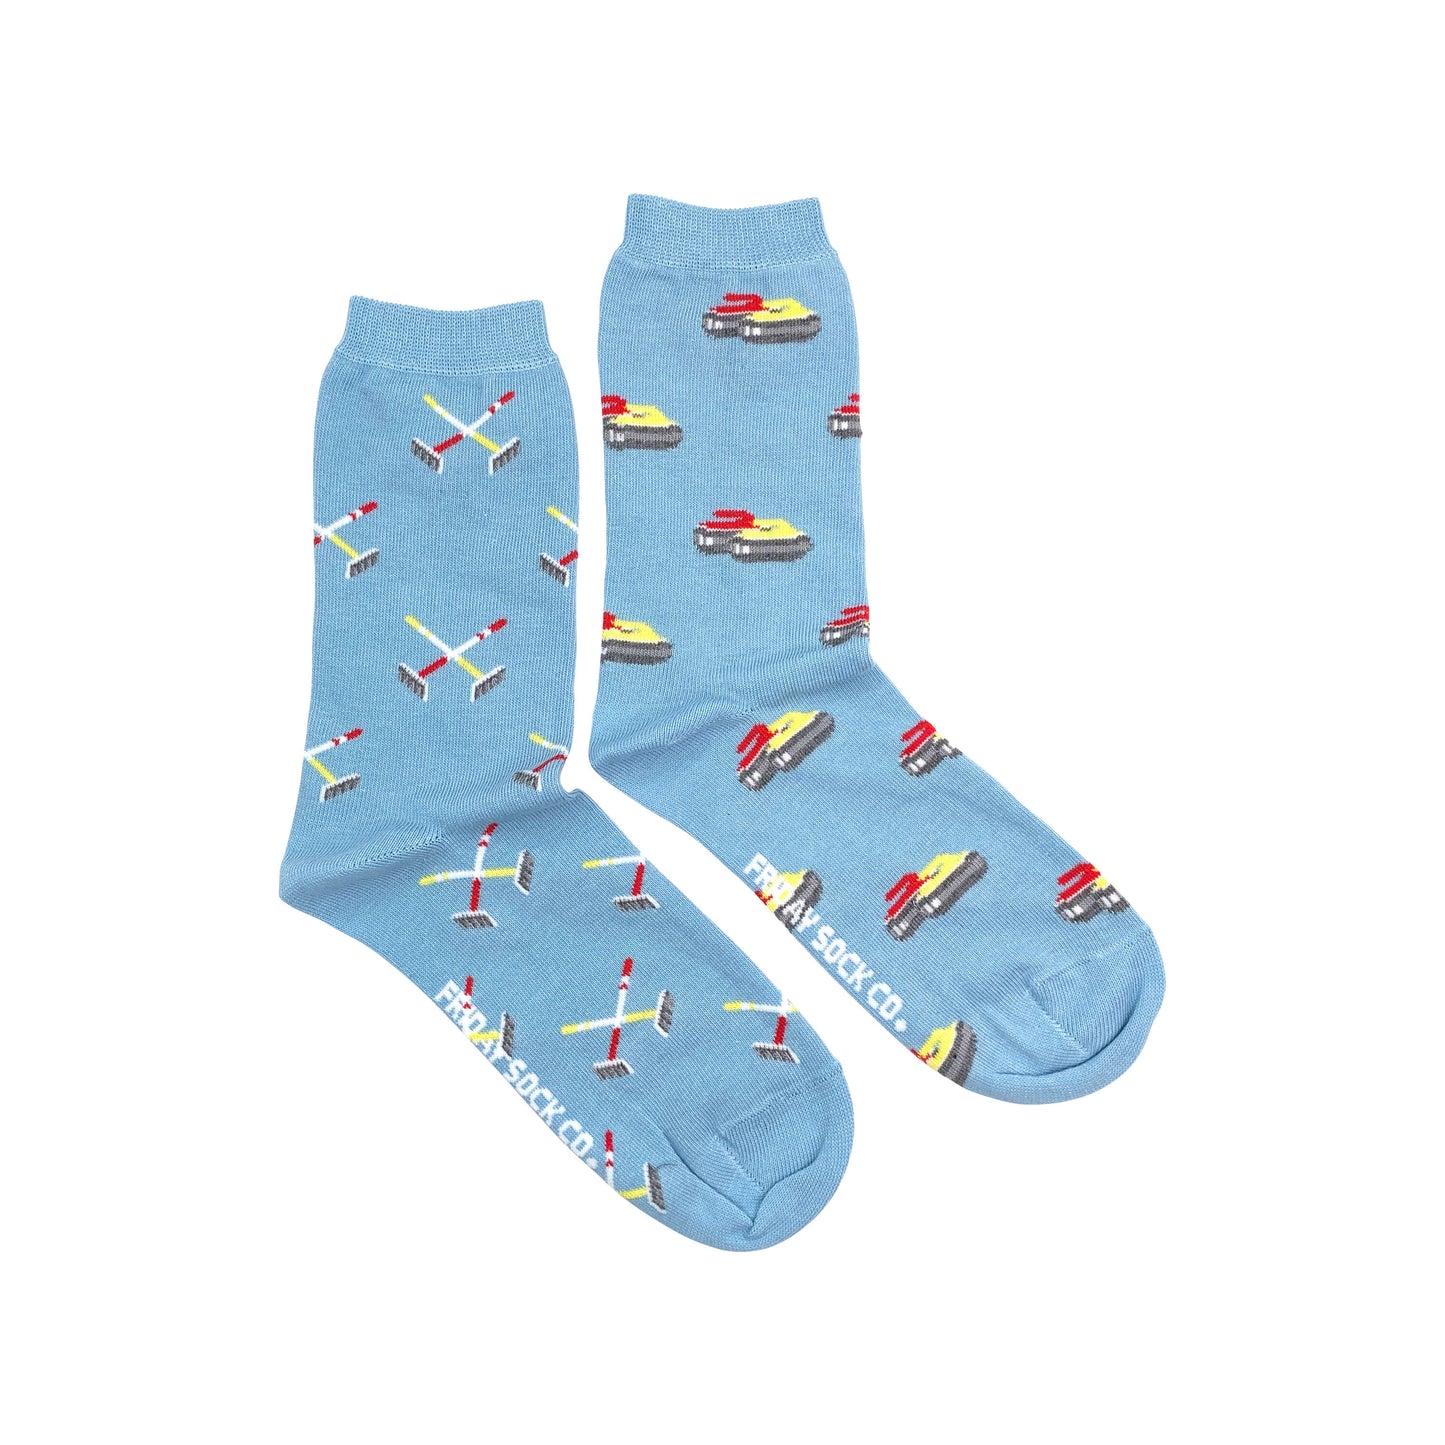 Women’s Socks | Curling | Mismatched Socks | Ethically Made: Women's 5 - 10